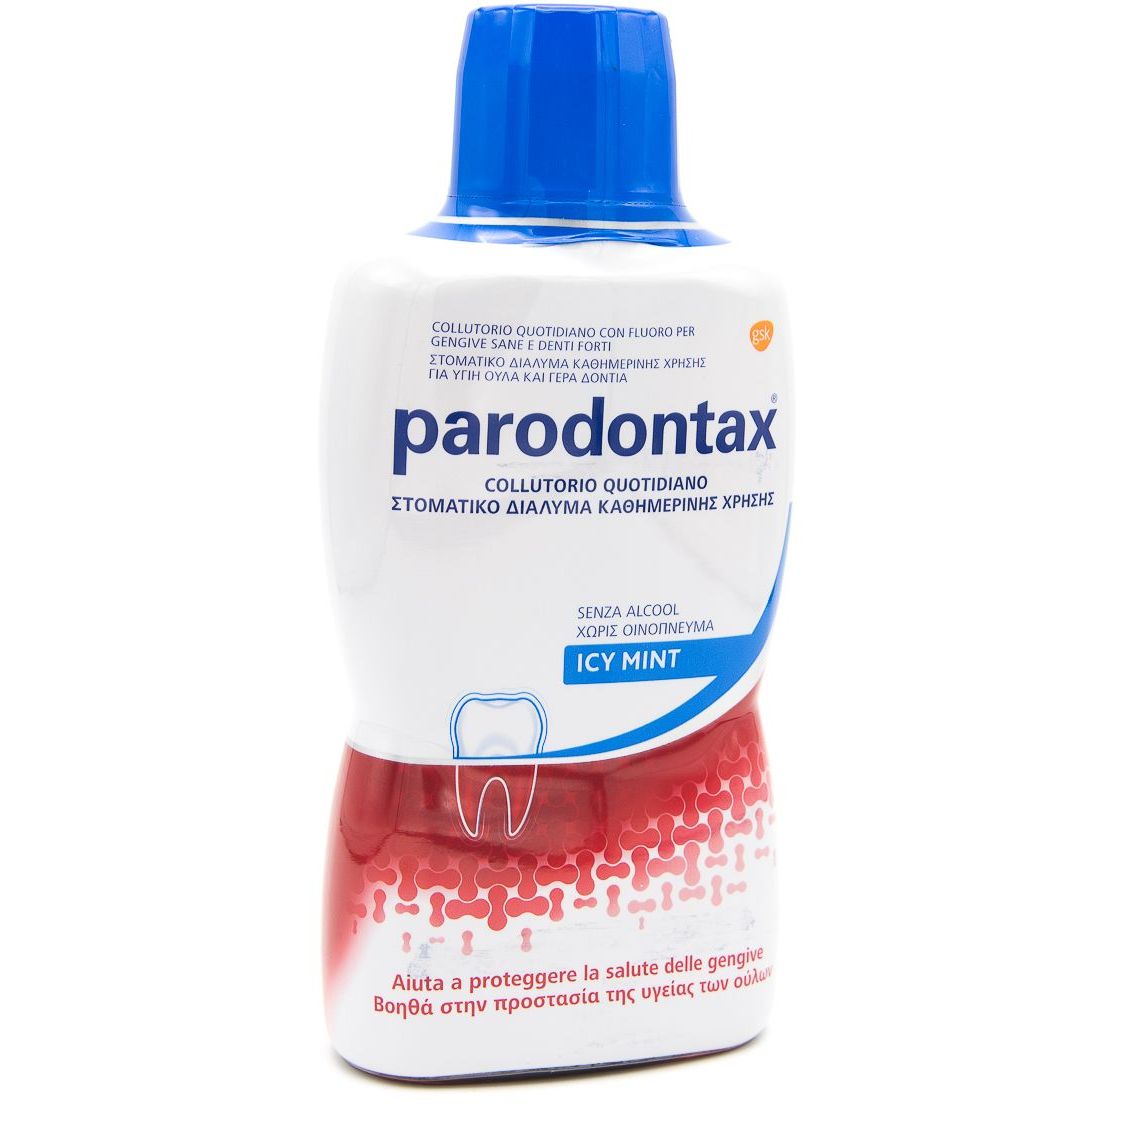 Image of Parodontax Collutorio Quotidiano Icy Mint 500ml 938654961